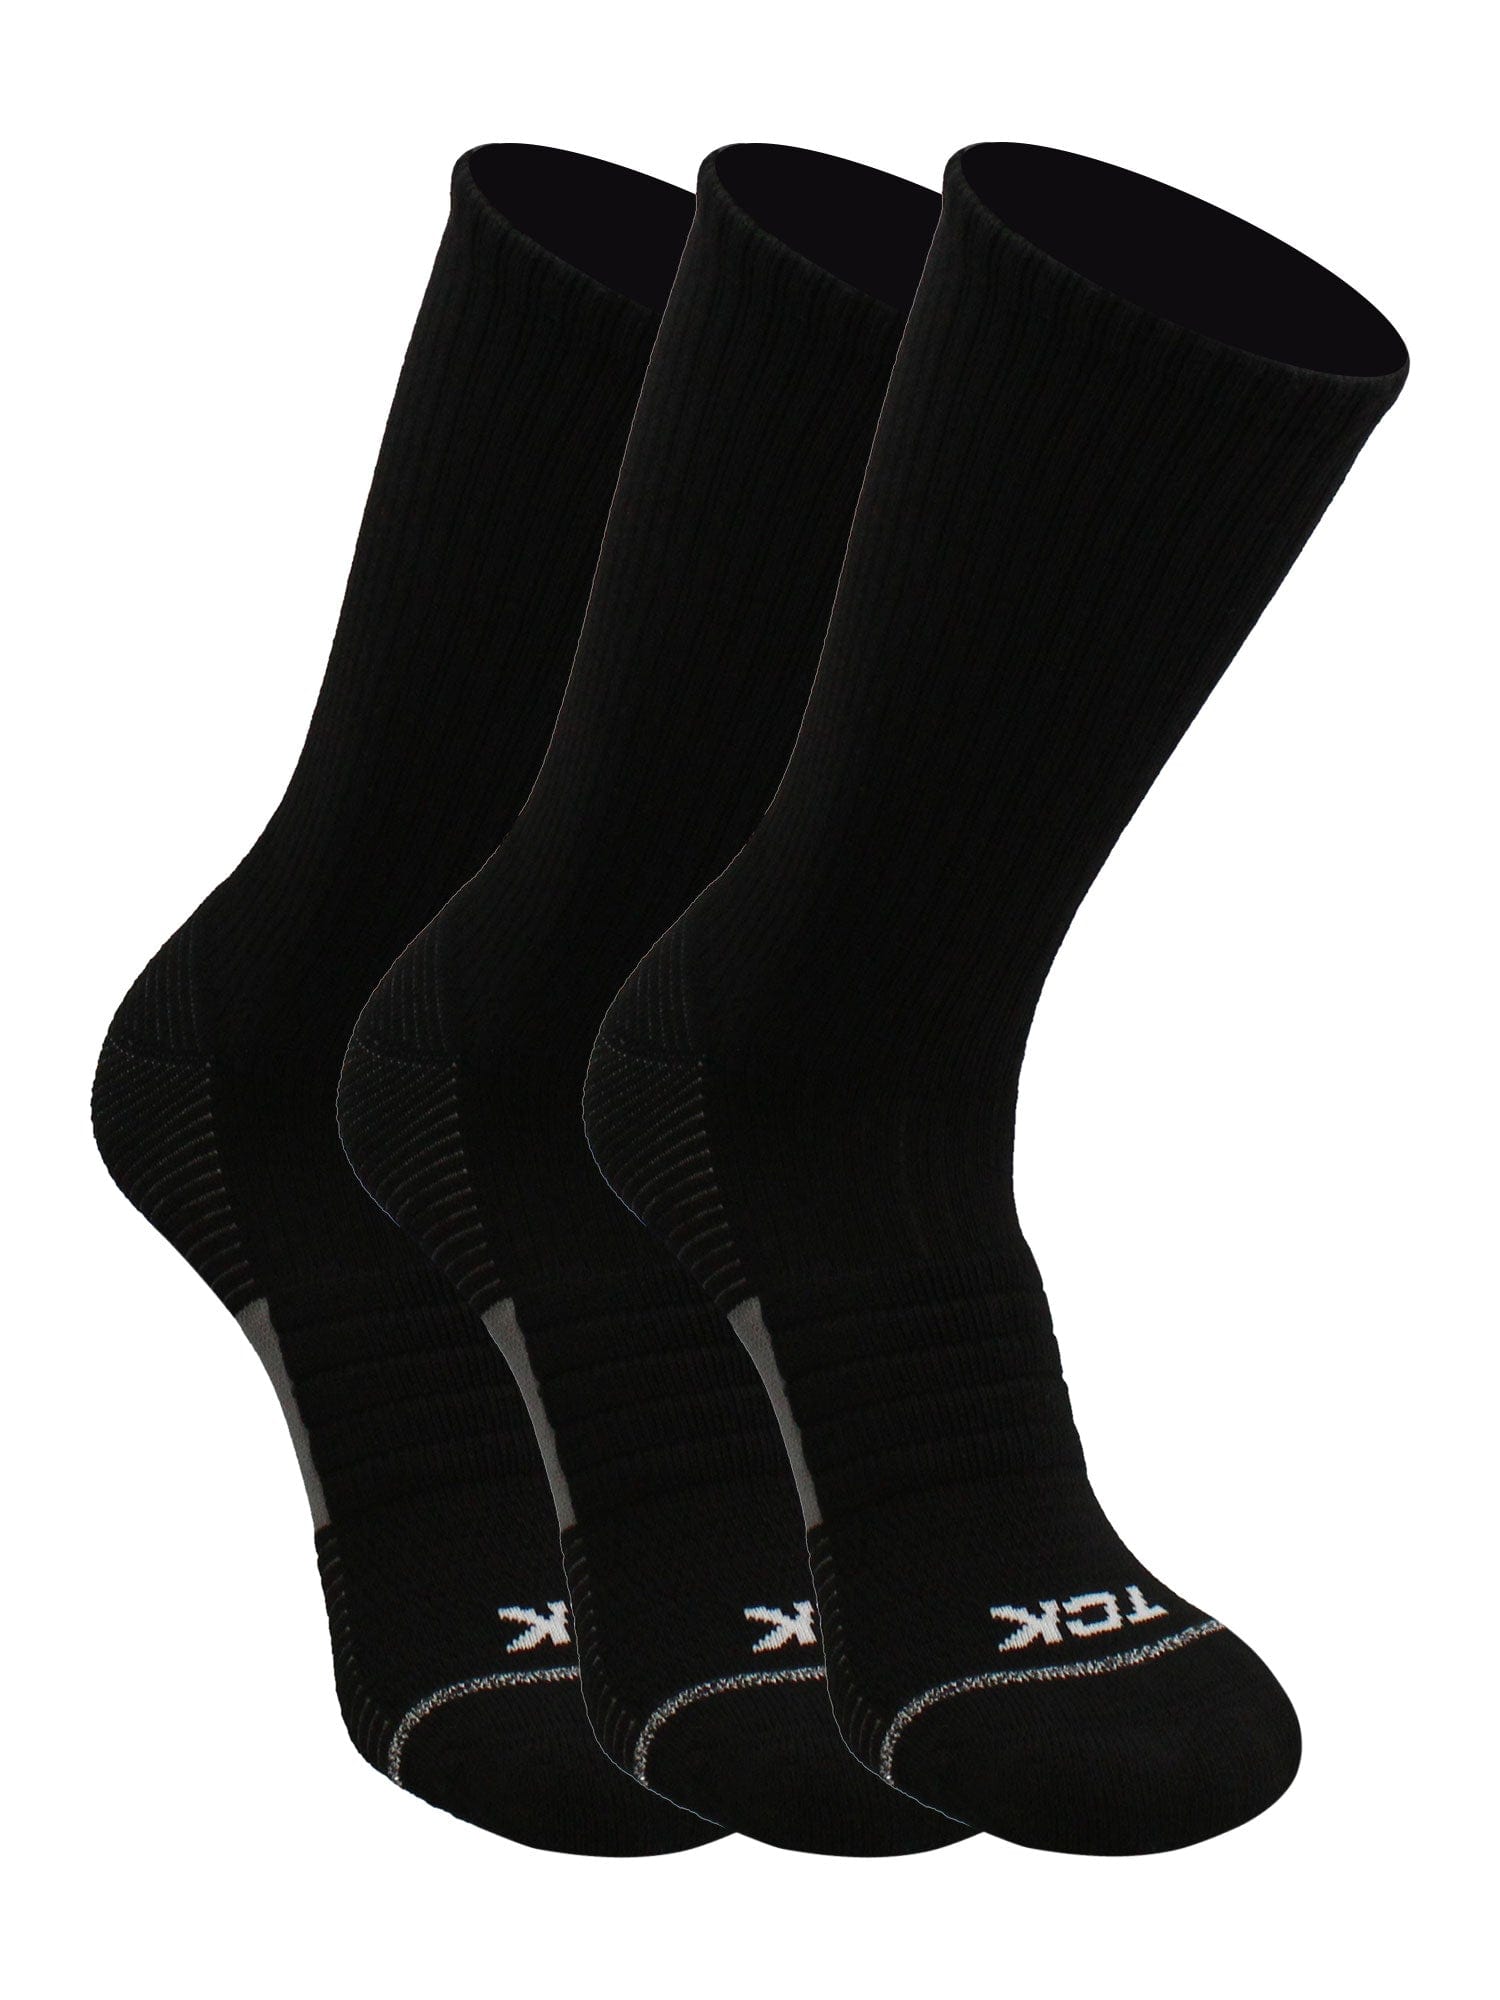 Athletic Cushioned Socks For Sports Crew Length 3-pack — TCK